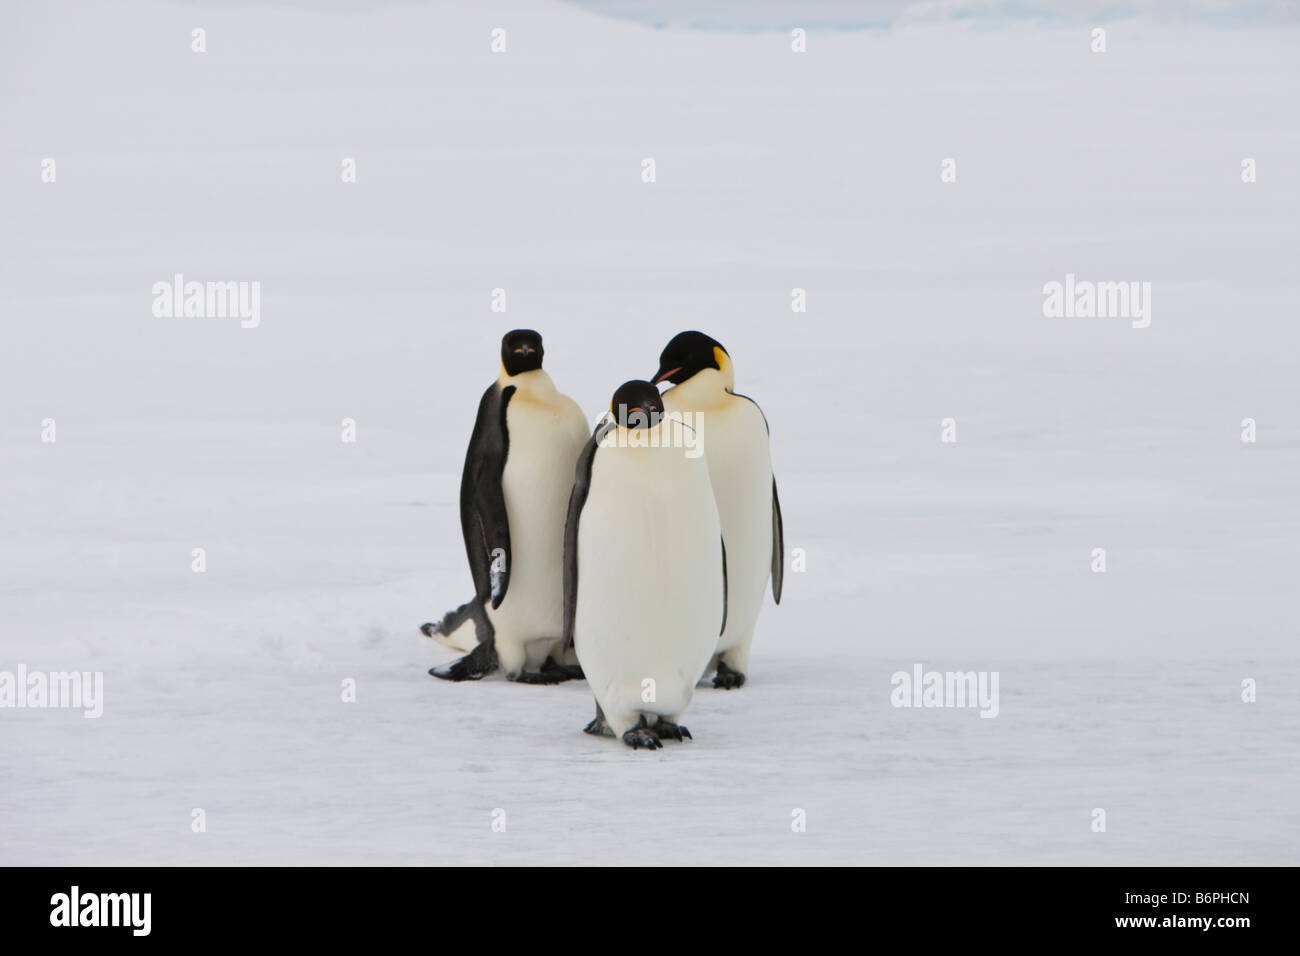 Group of 3 Emperor Penguins standing together facing forward on the snow covered fast ice in Antarctica. white background Stock Photo